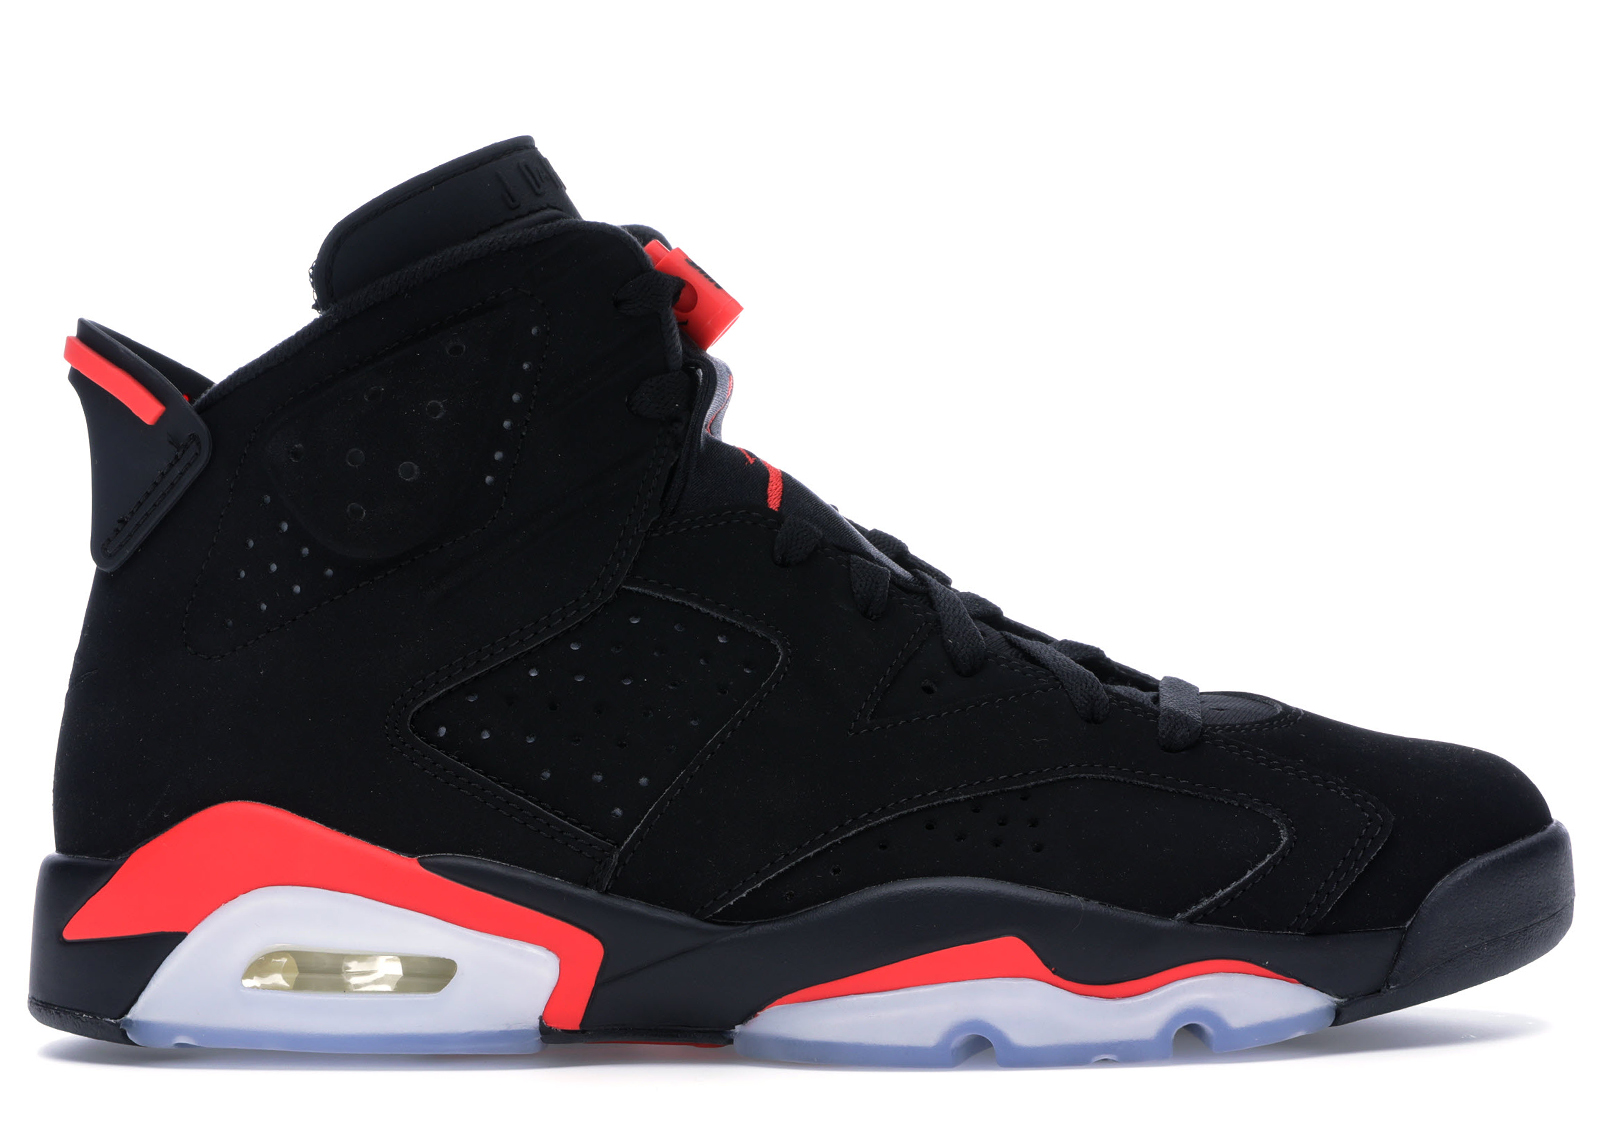 Jordan 6 - All Sizes & Colorways from $68 at StockX